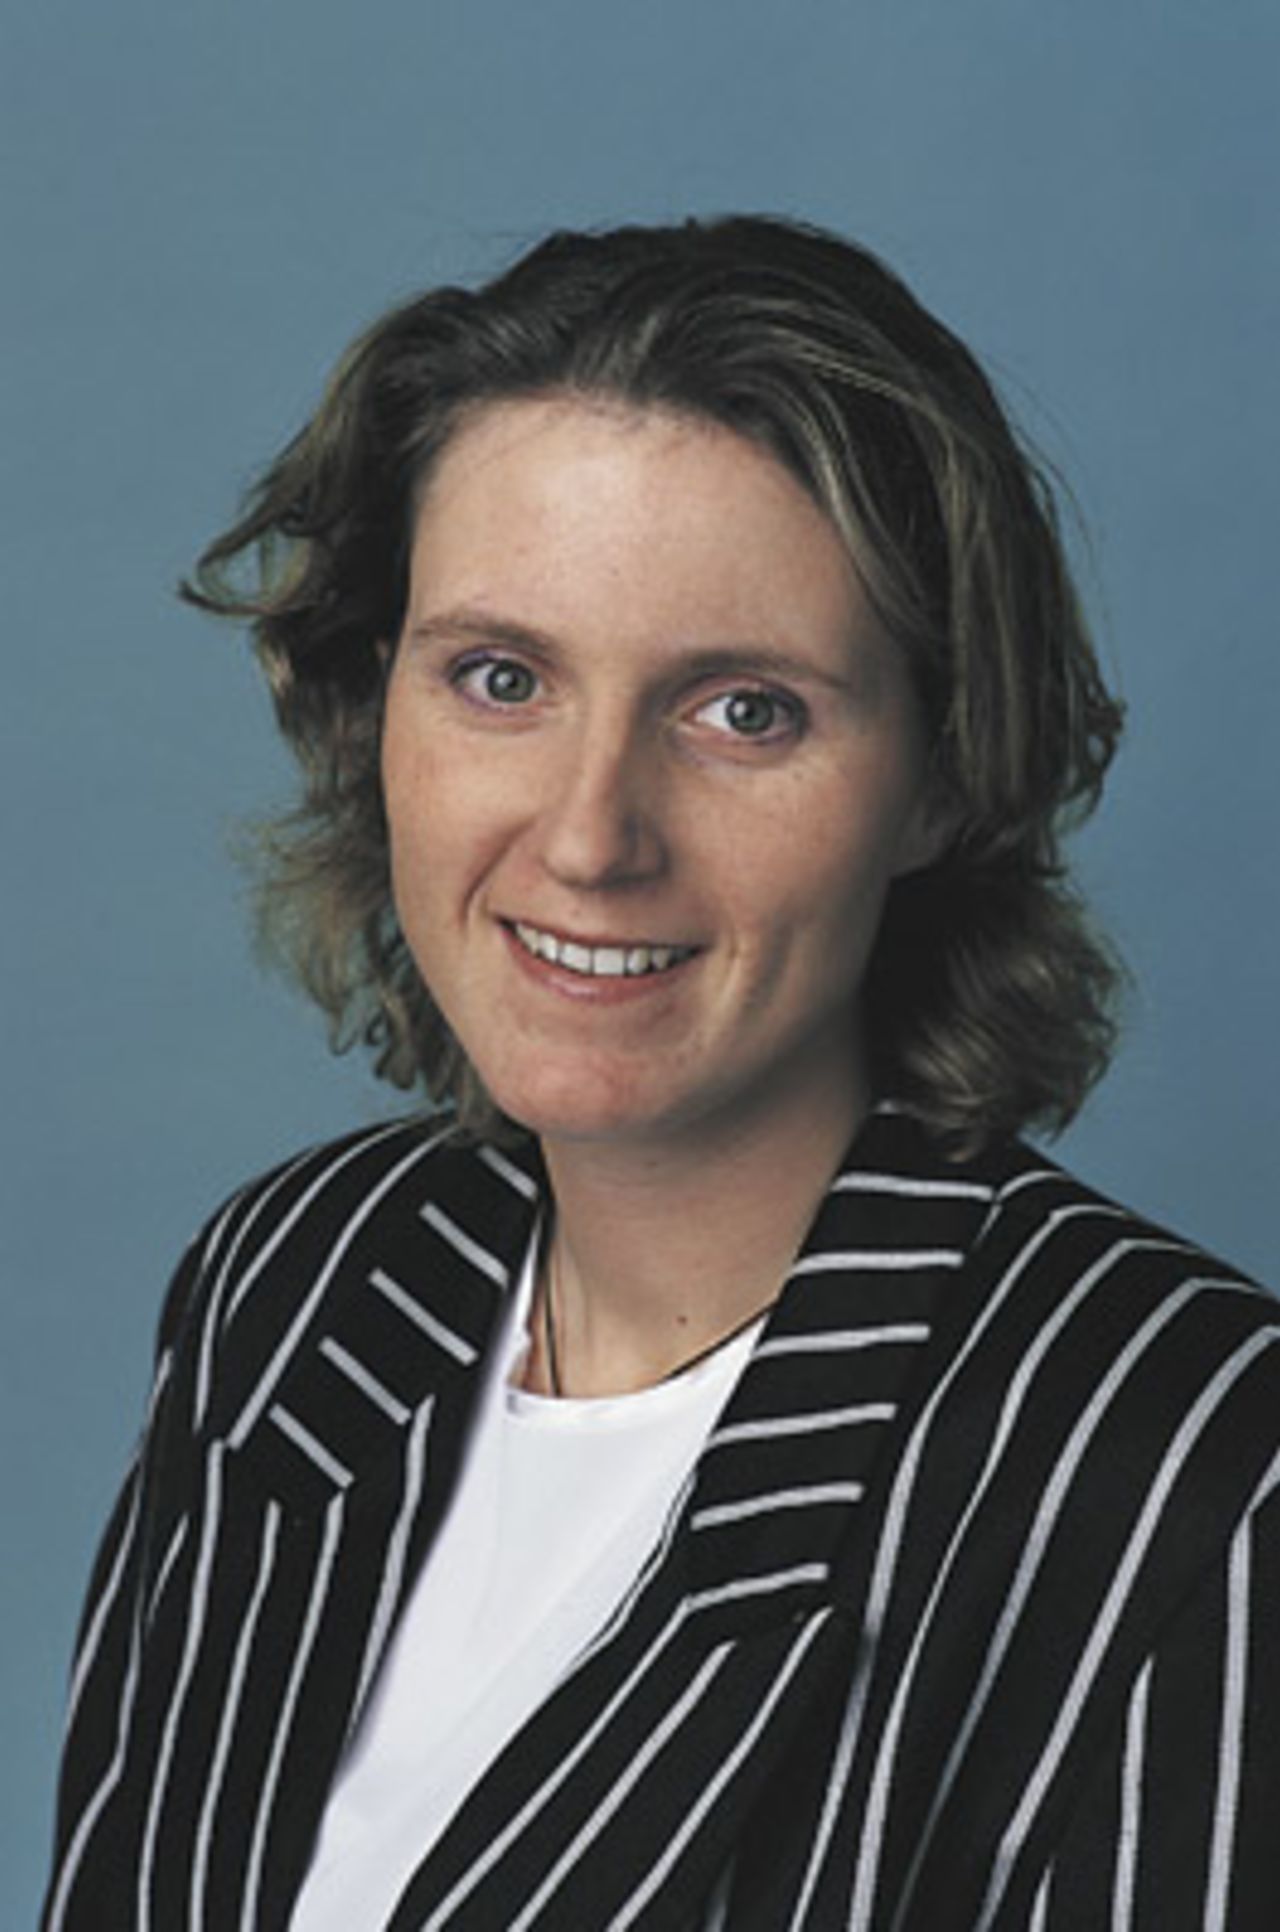 Portrait of Kathryn Ramel, at Lincoln, July 2000 - New Zealand training squad member for the CricInfo Women's World Cup 2000